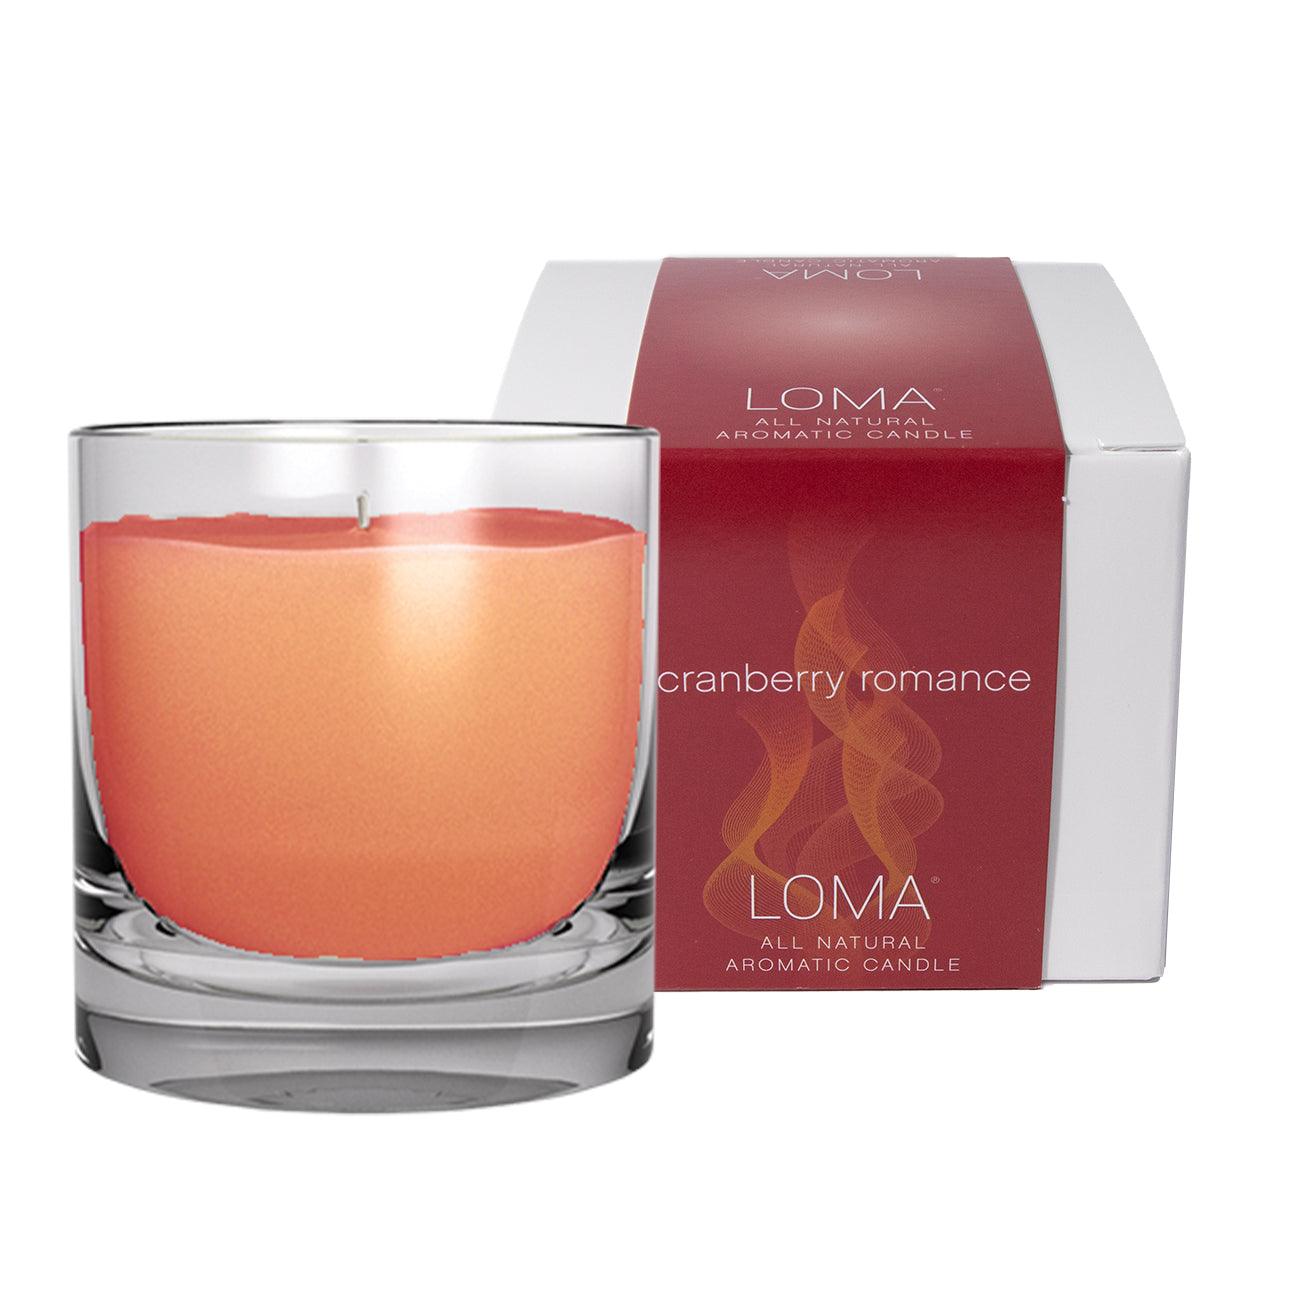 Cranberry Romance Candle - Loma Hair and Body Care